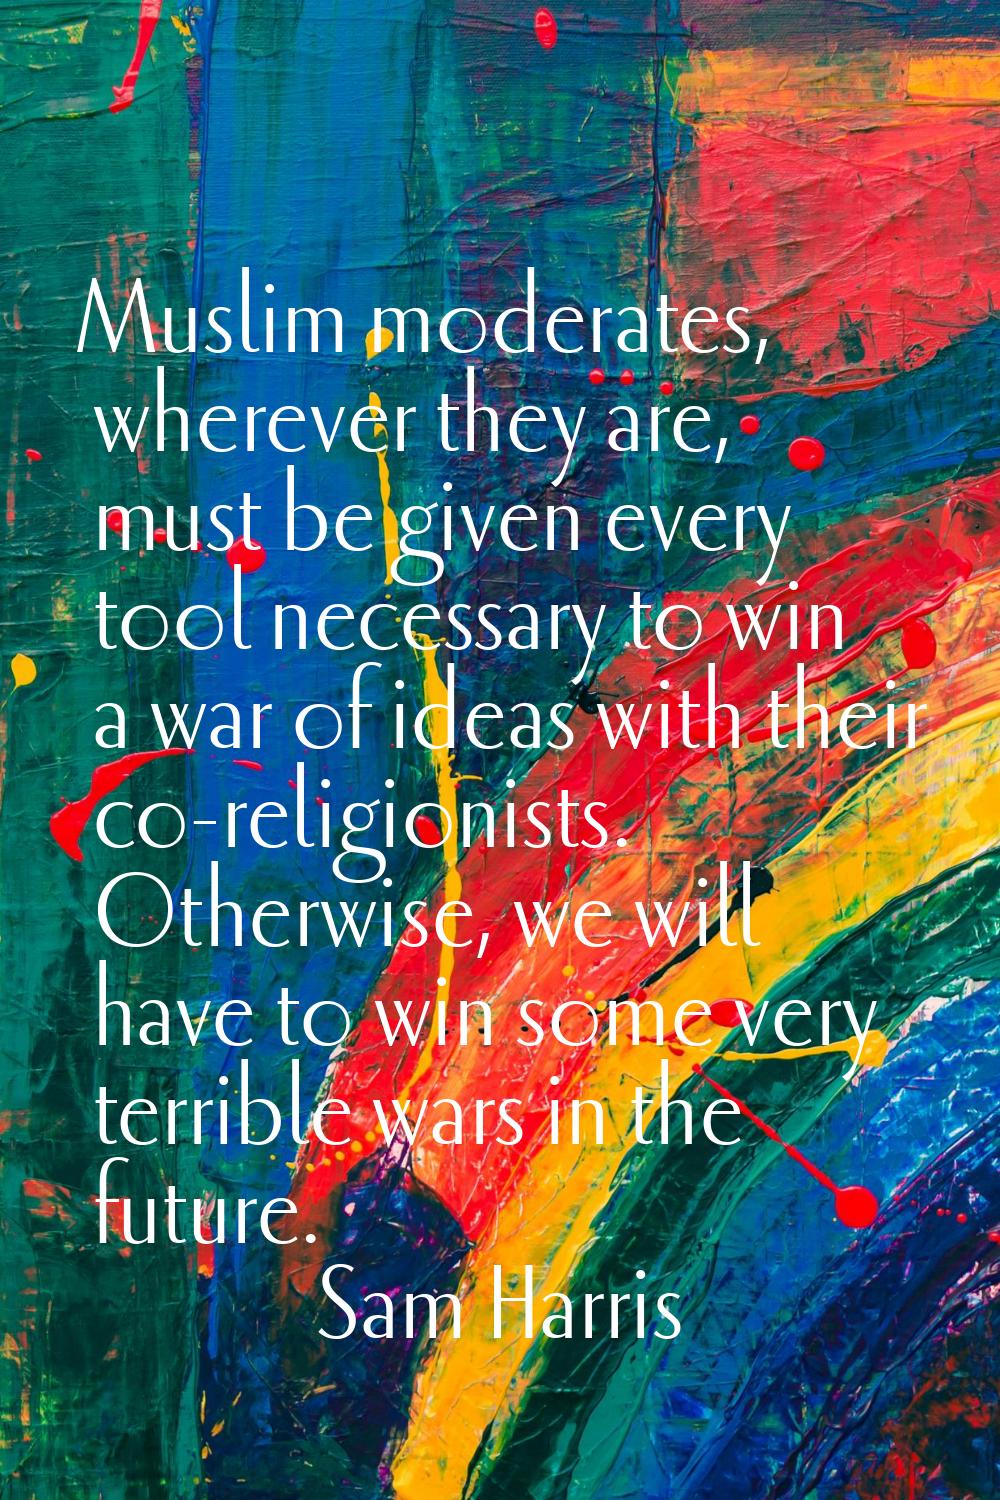 Muslim moderates, wherever they are, must be given every tool necessary to win a war of ideas with 